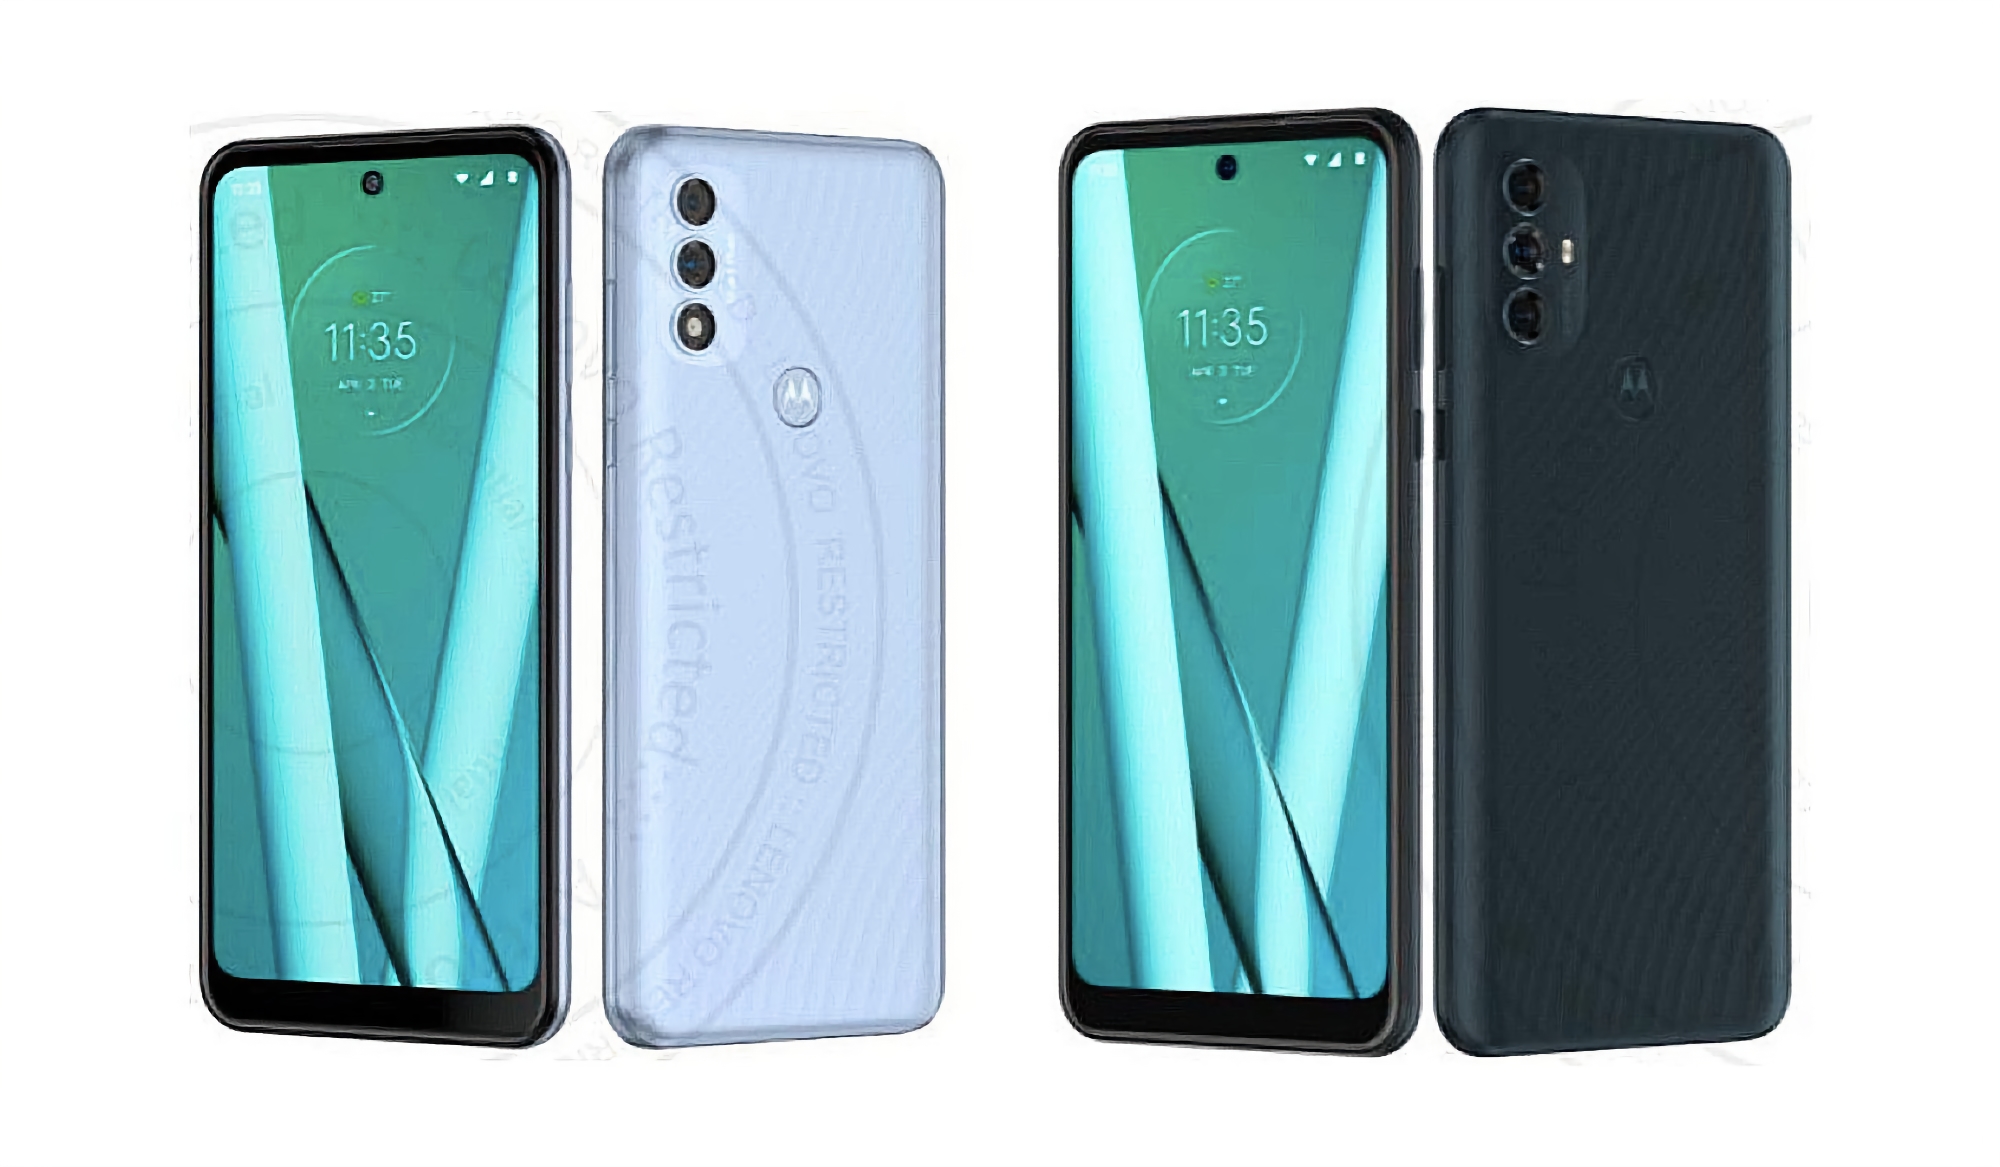 Motorola is getting ready to release a new budget phone, here's what it will look like